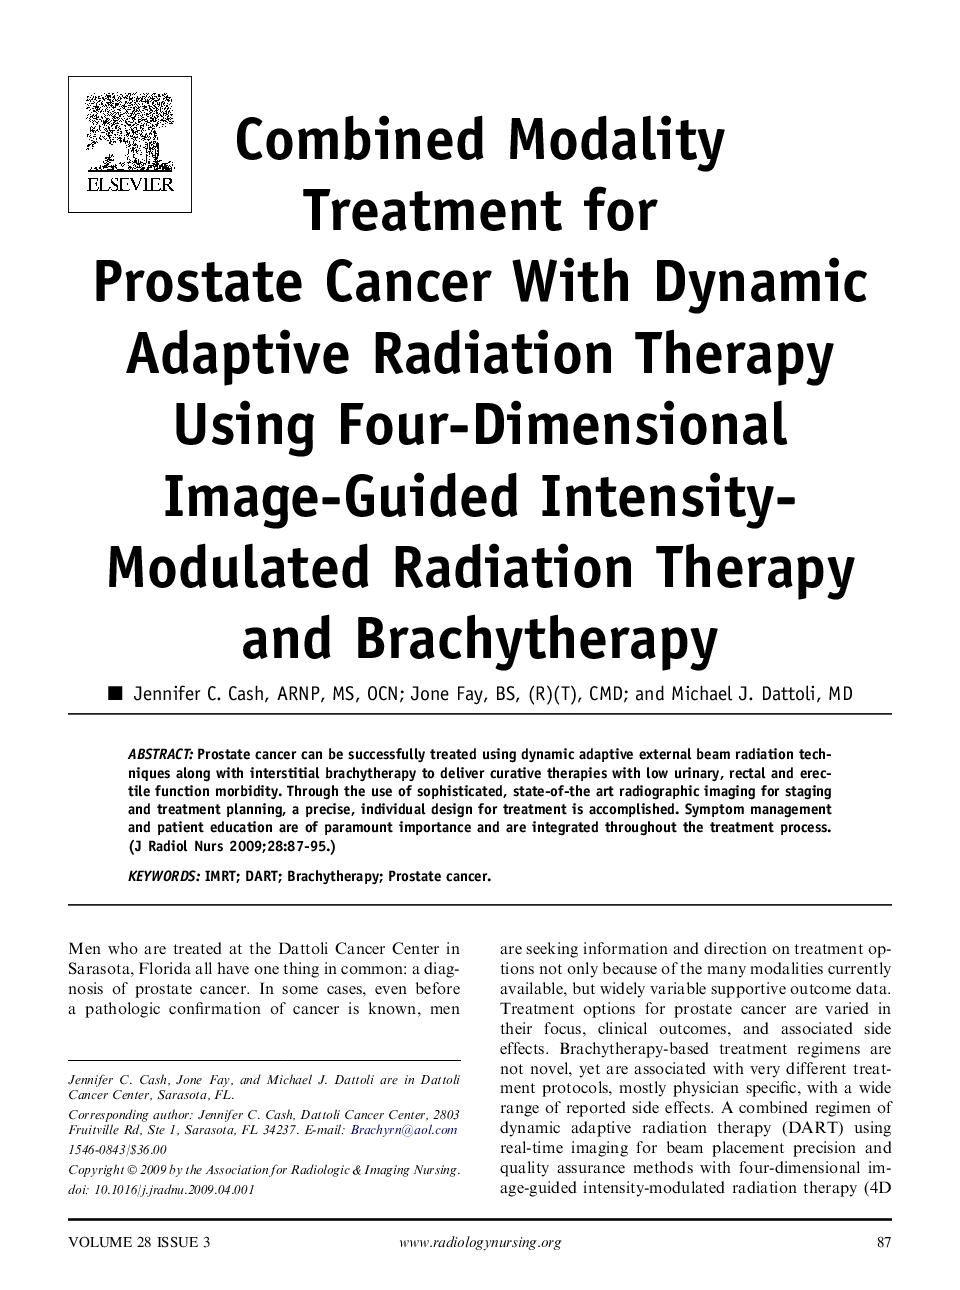 Combined Modality Treatment for Prostate Cancer With Dynamic Adaptive Radiation Therapy Using Four-Dimensional Image-Guided Intensity-Modulated Radiation Therapy and Brachytherapy